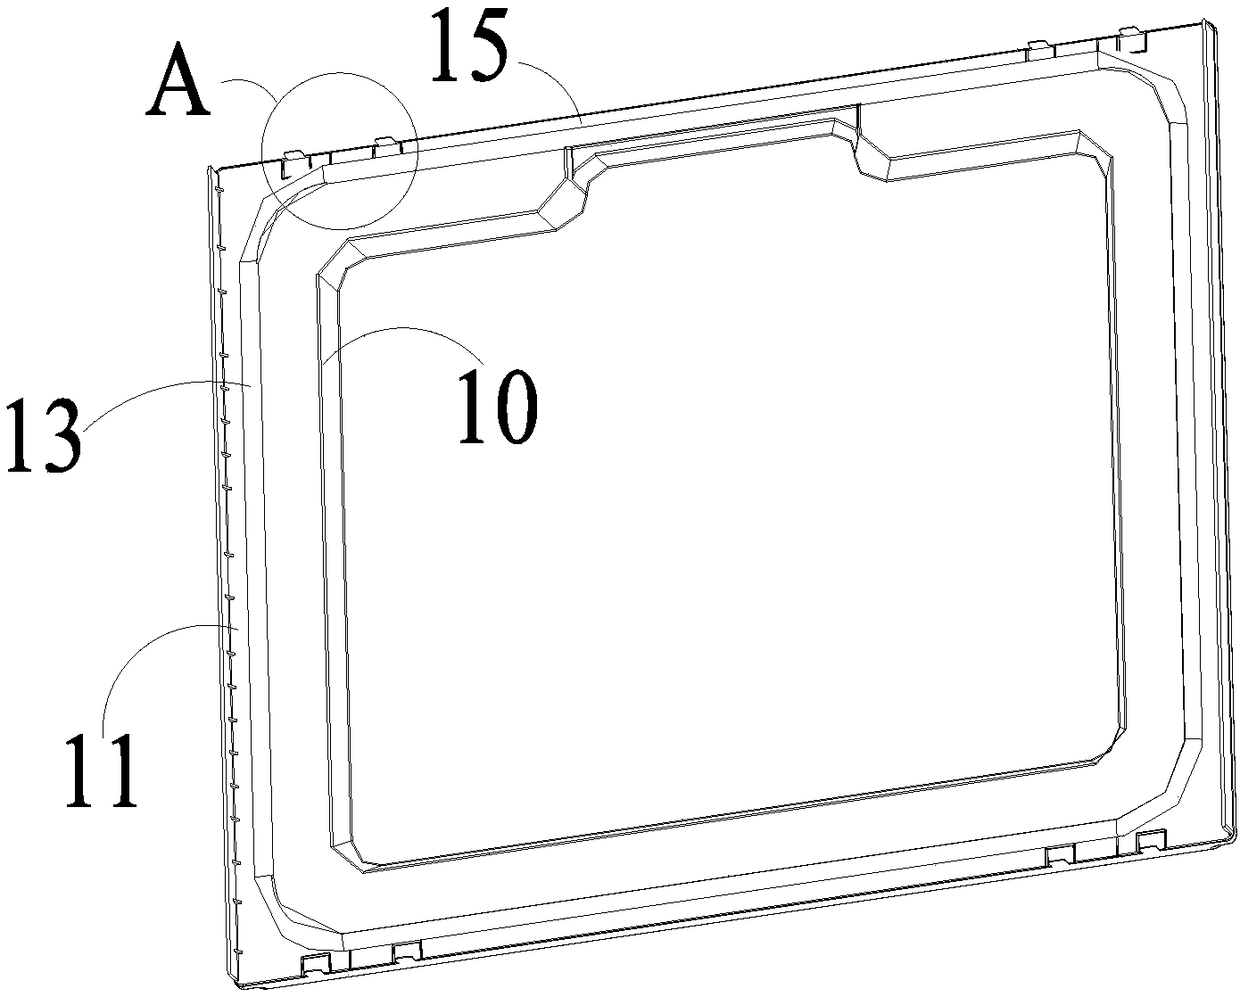 Top cover assembly of dishwasher